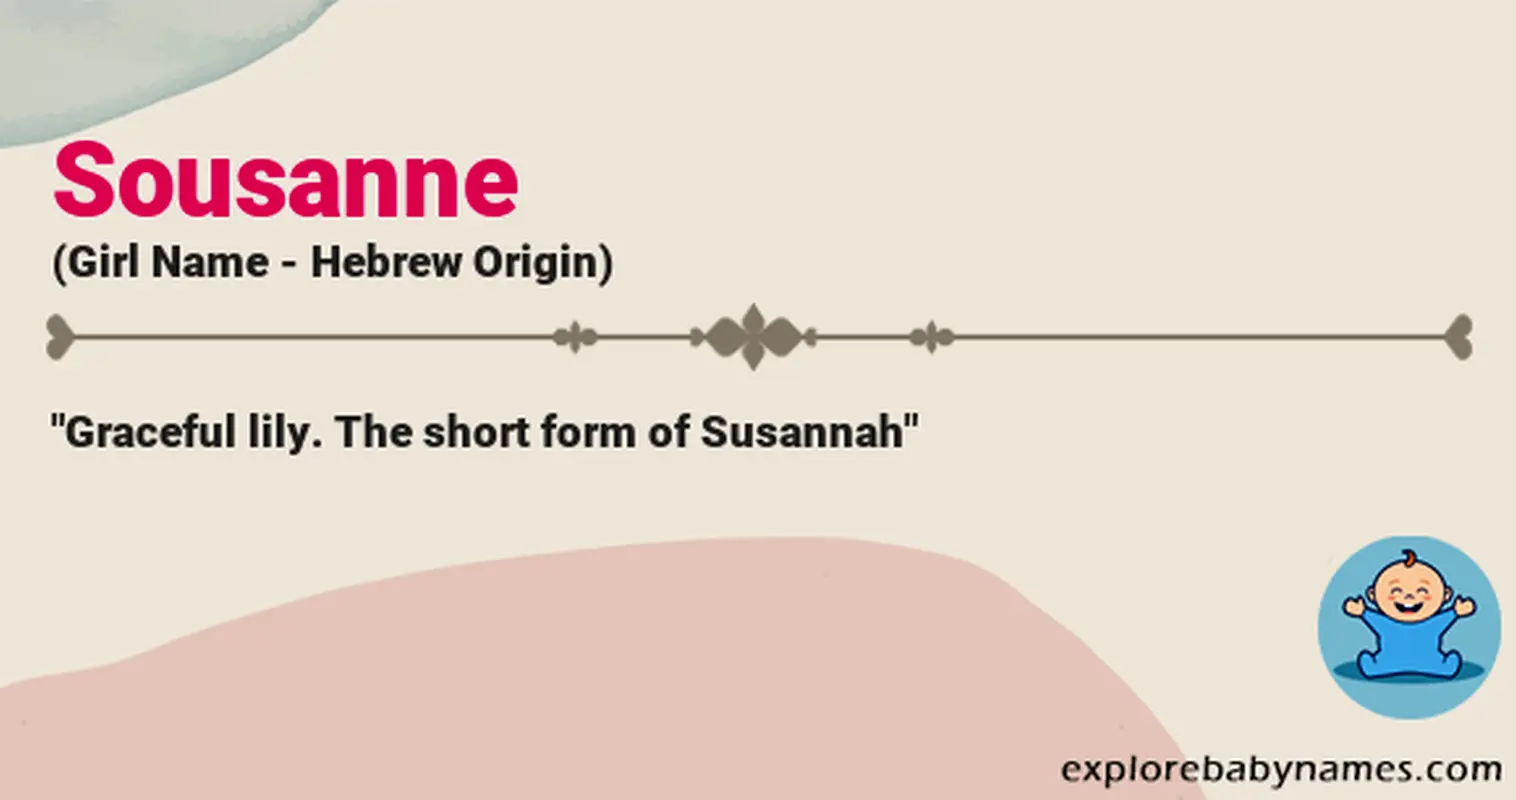 Meaning of Sousanne